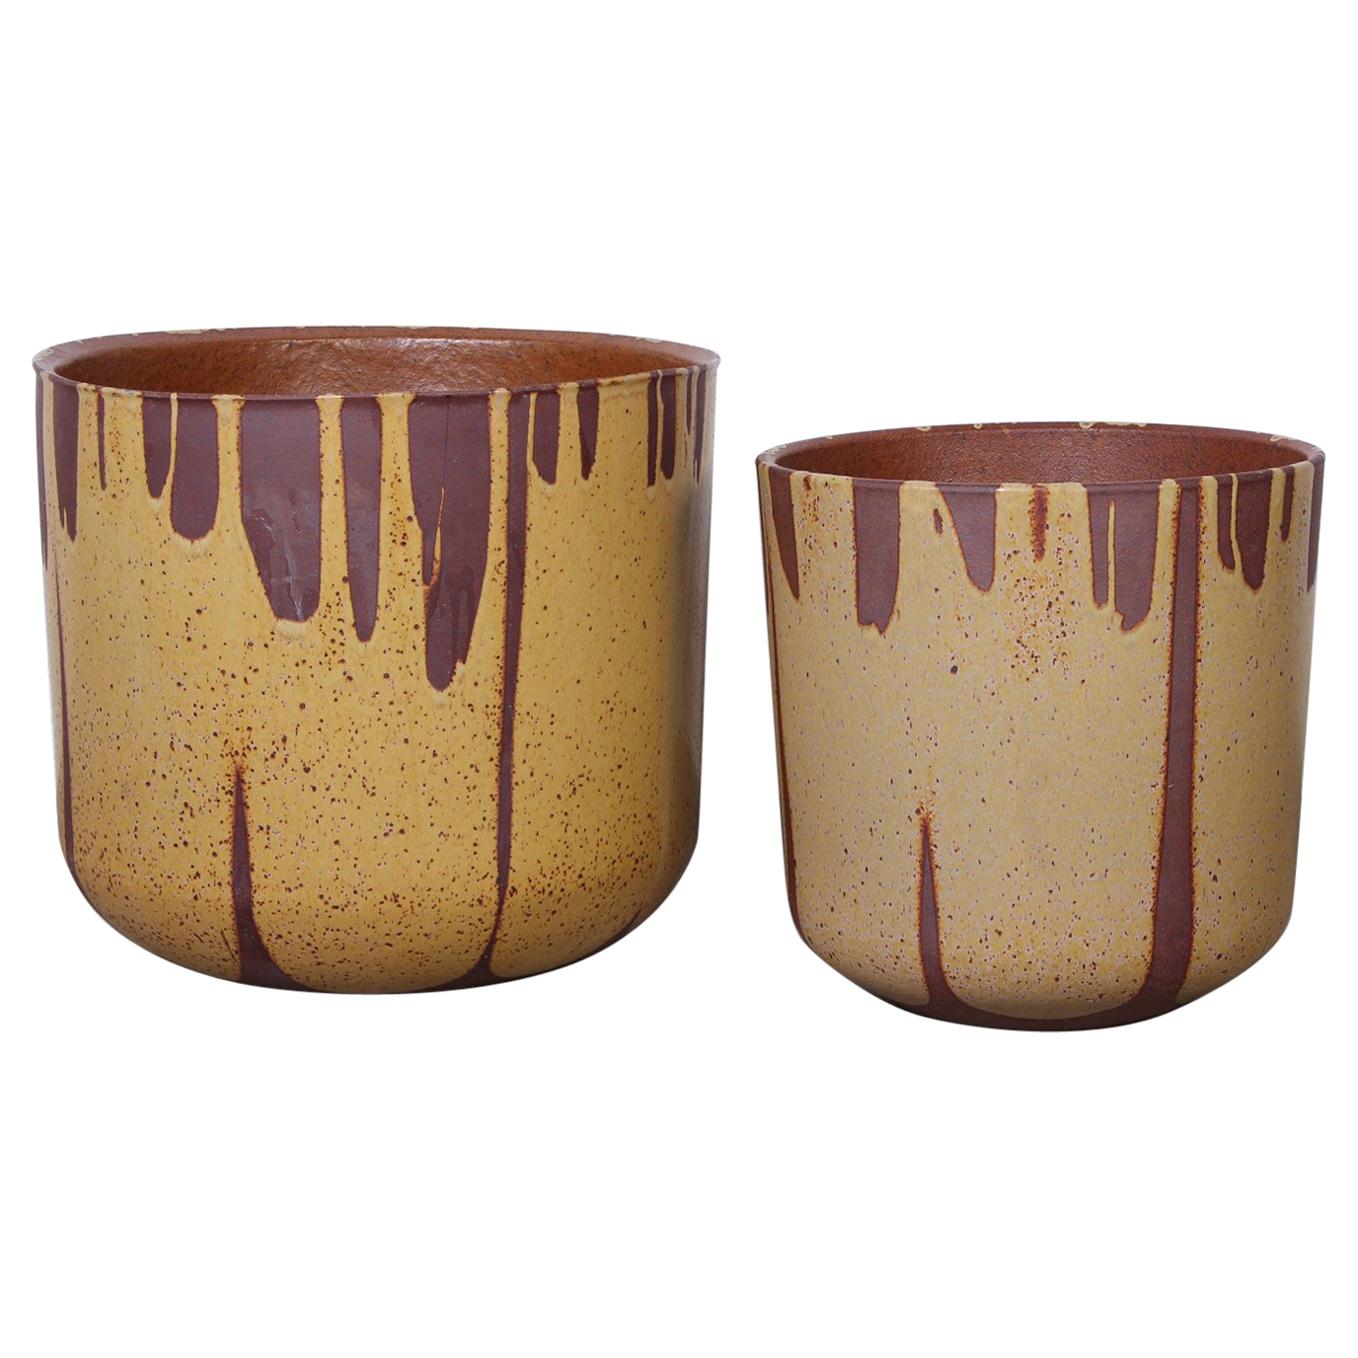 Pair of Flame Glazed Planters by David Cressey